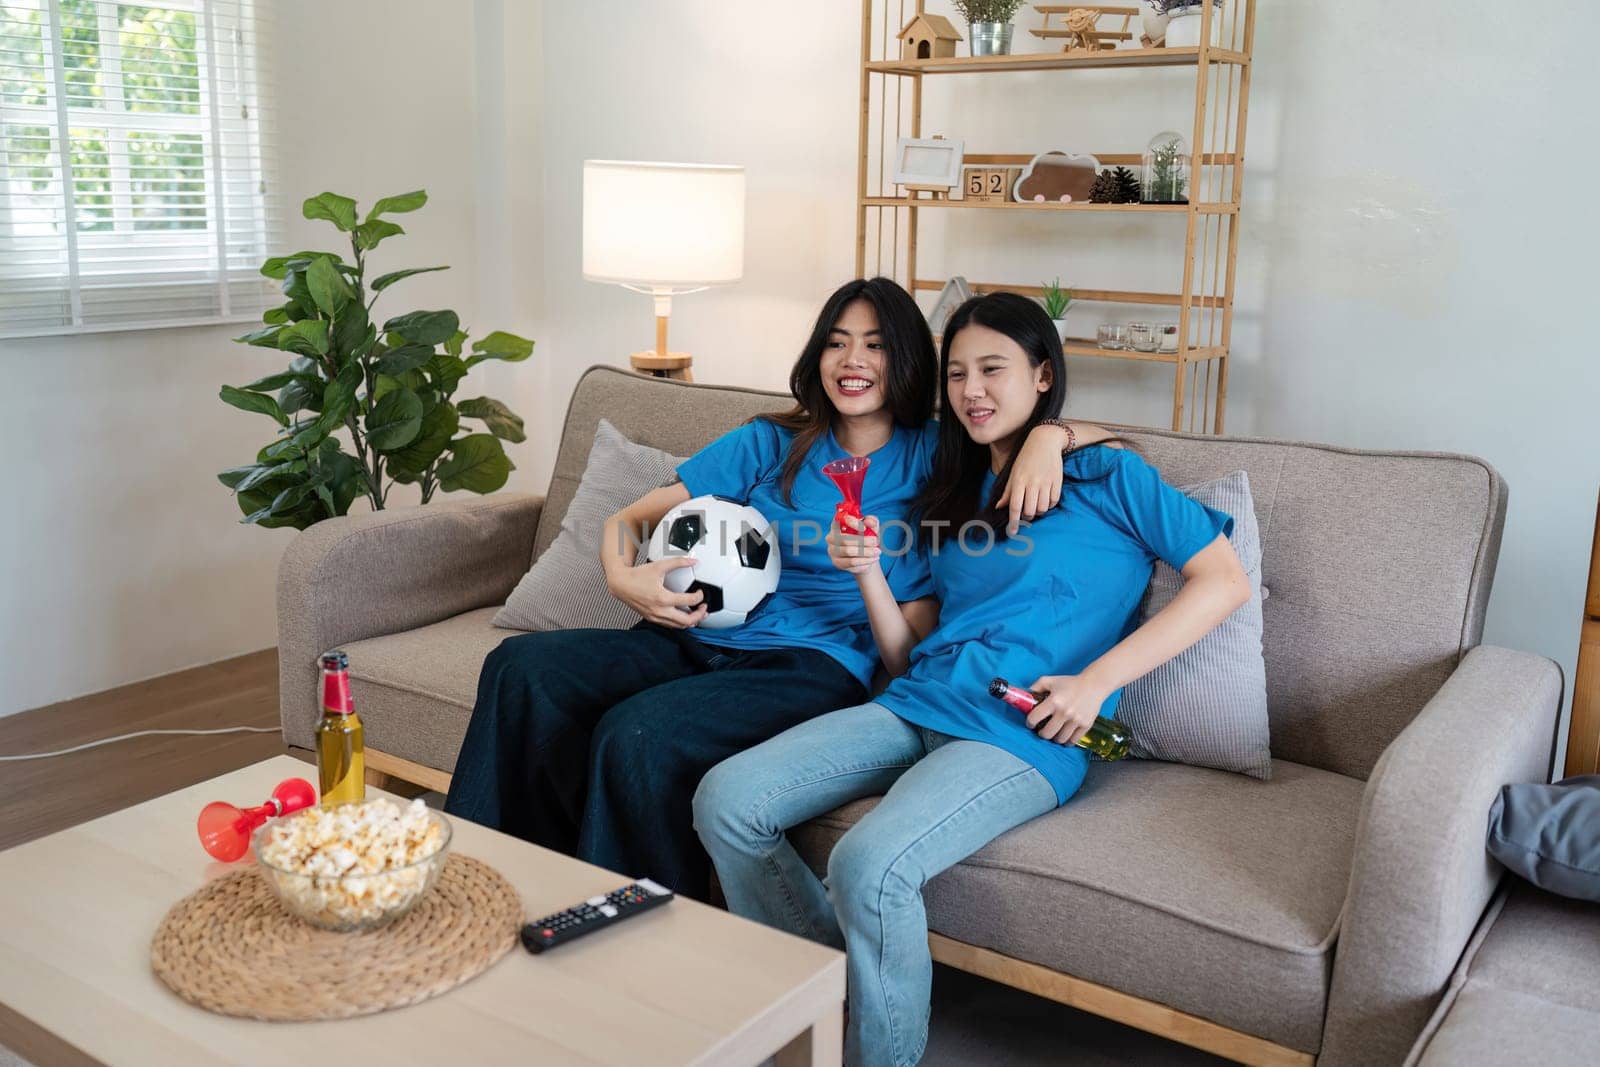 Couple woman friend having fun watching football match on TV, drinking beer and cheering football fans watching game at home celebrating after their team scoring a goal.